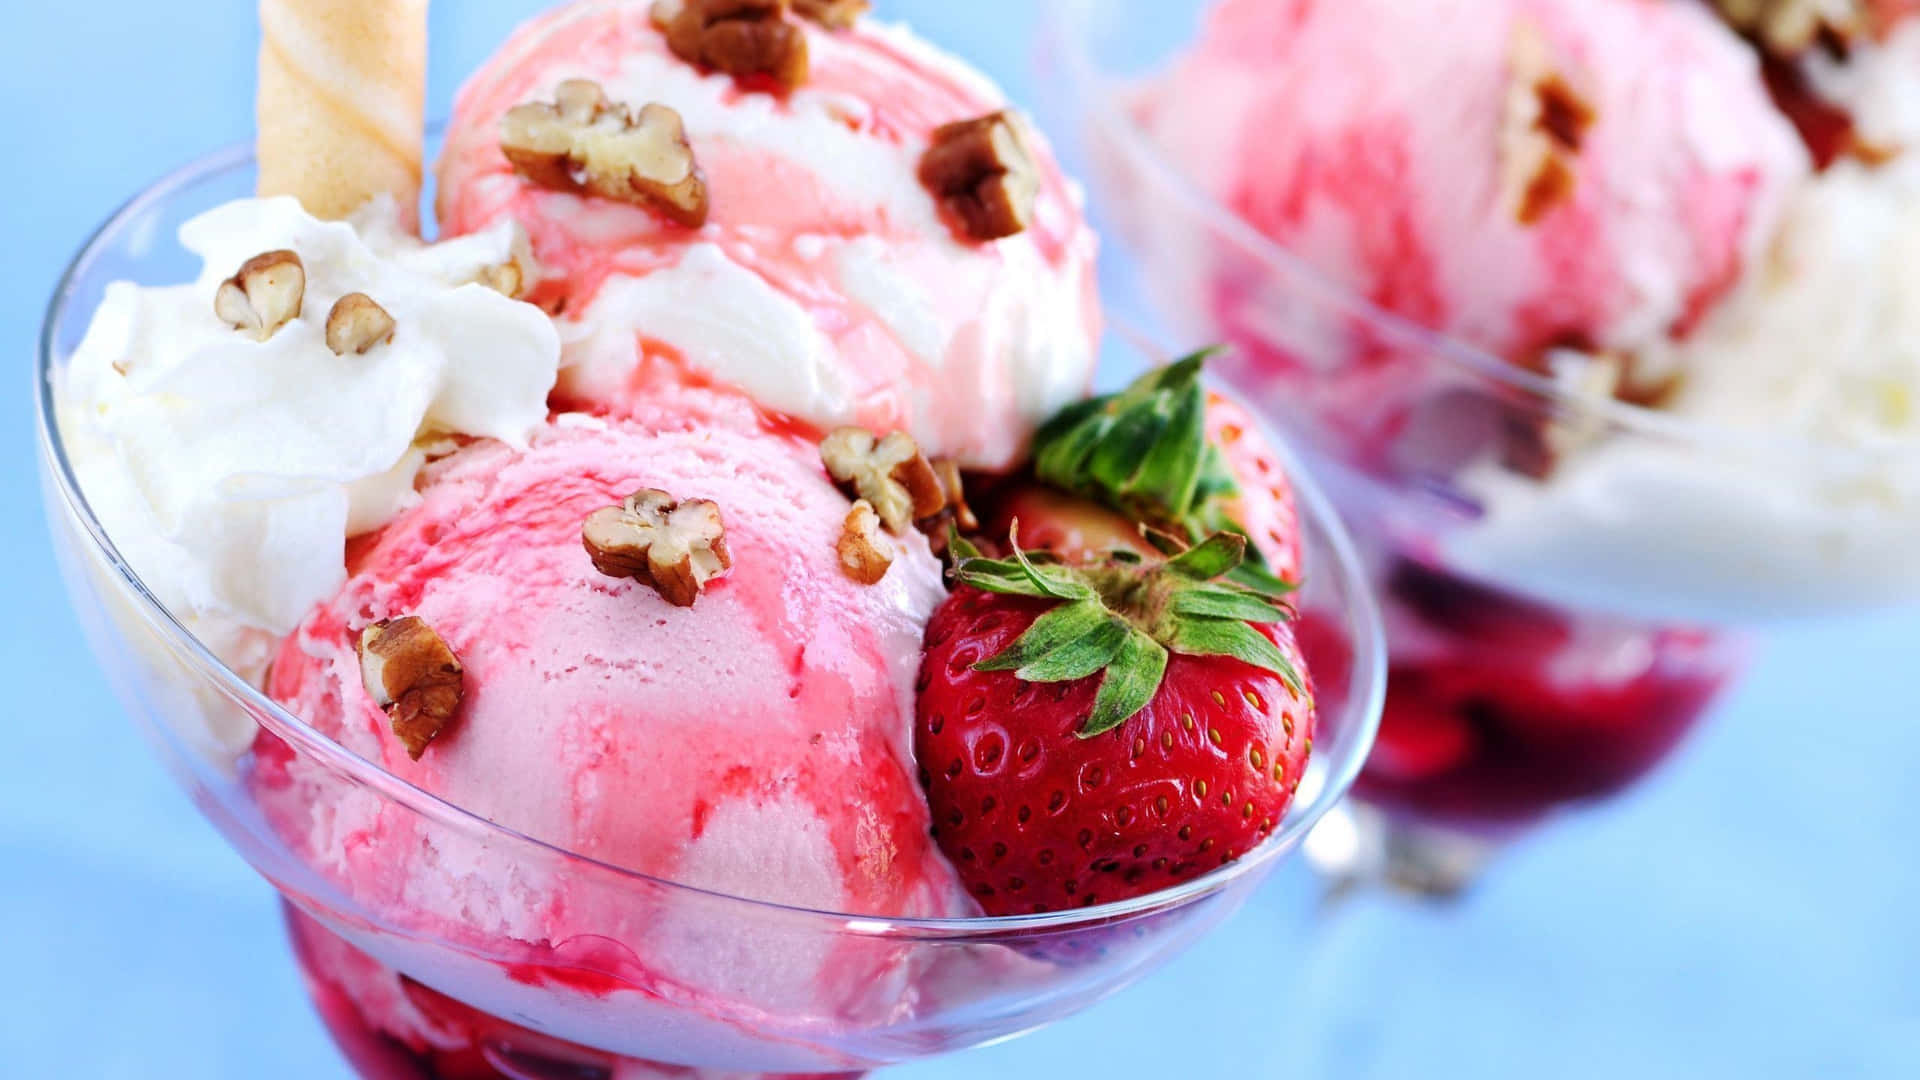 Enjoy a summery day with cold Ice Cream